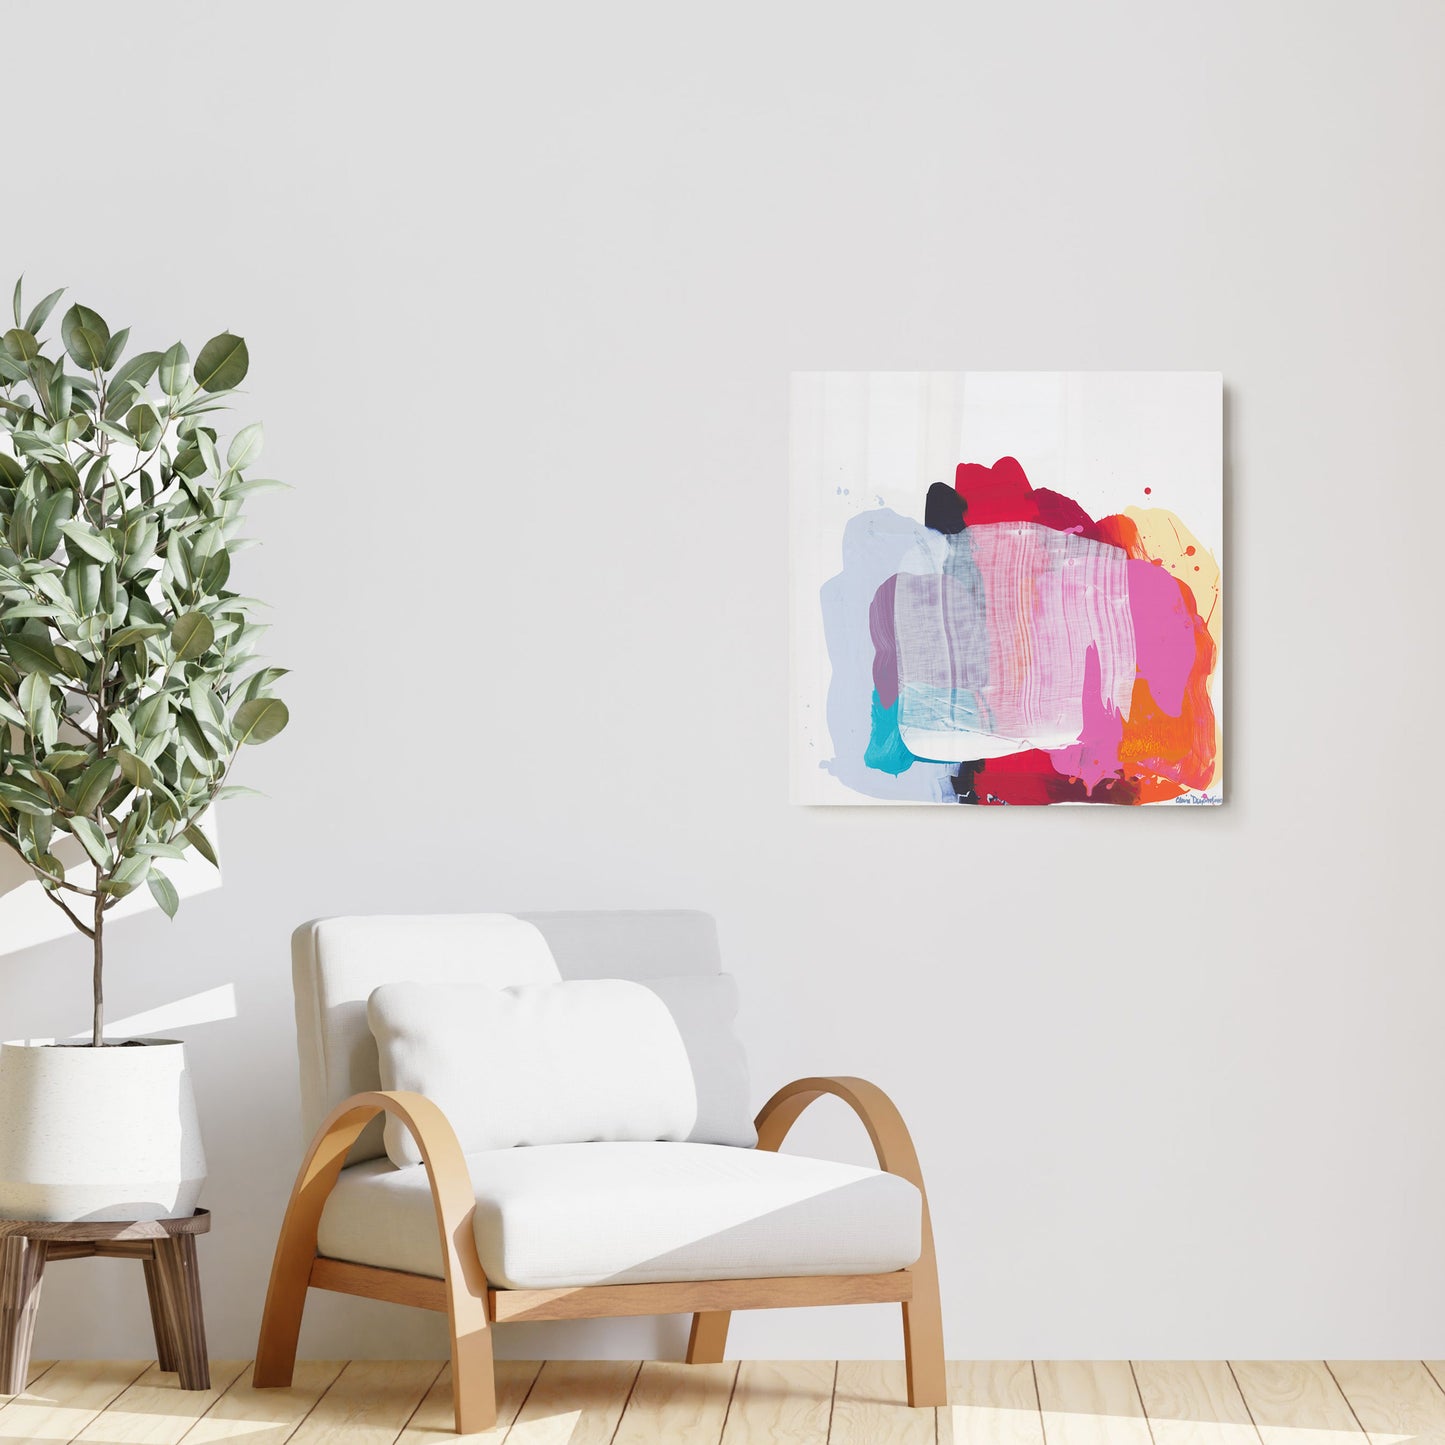 Claire Desjardins' Love 11 painting reproduced on HD metal print and displayed on wall